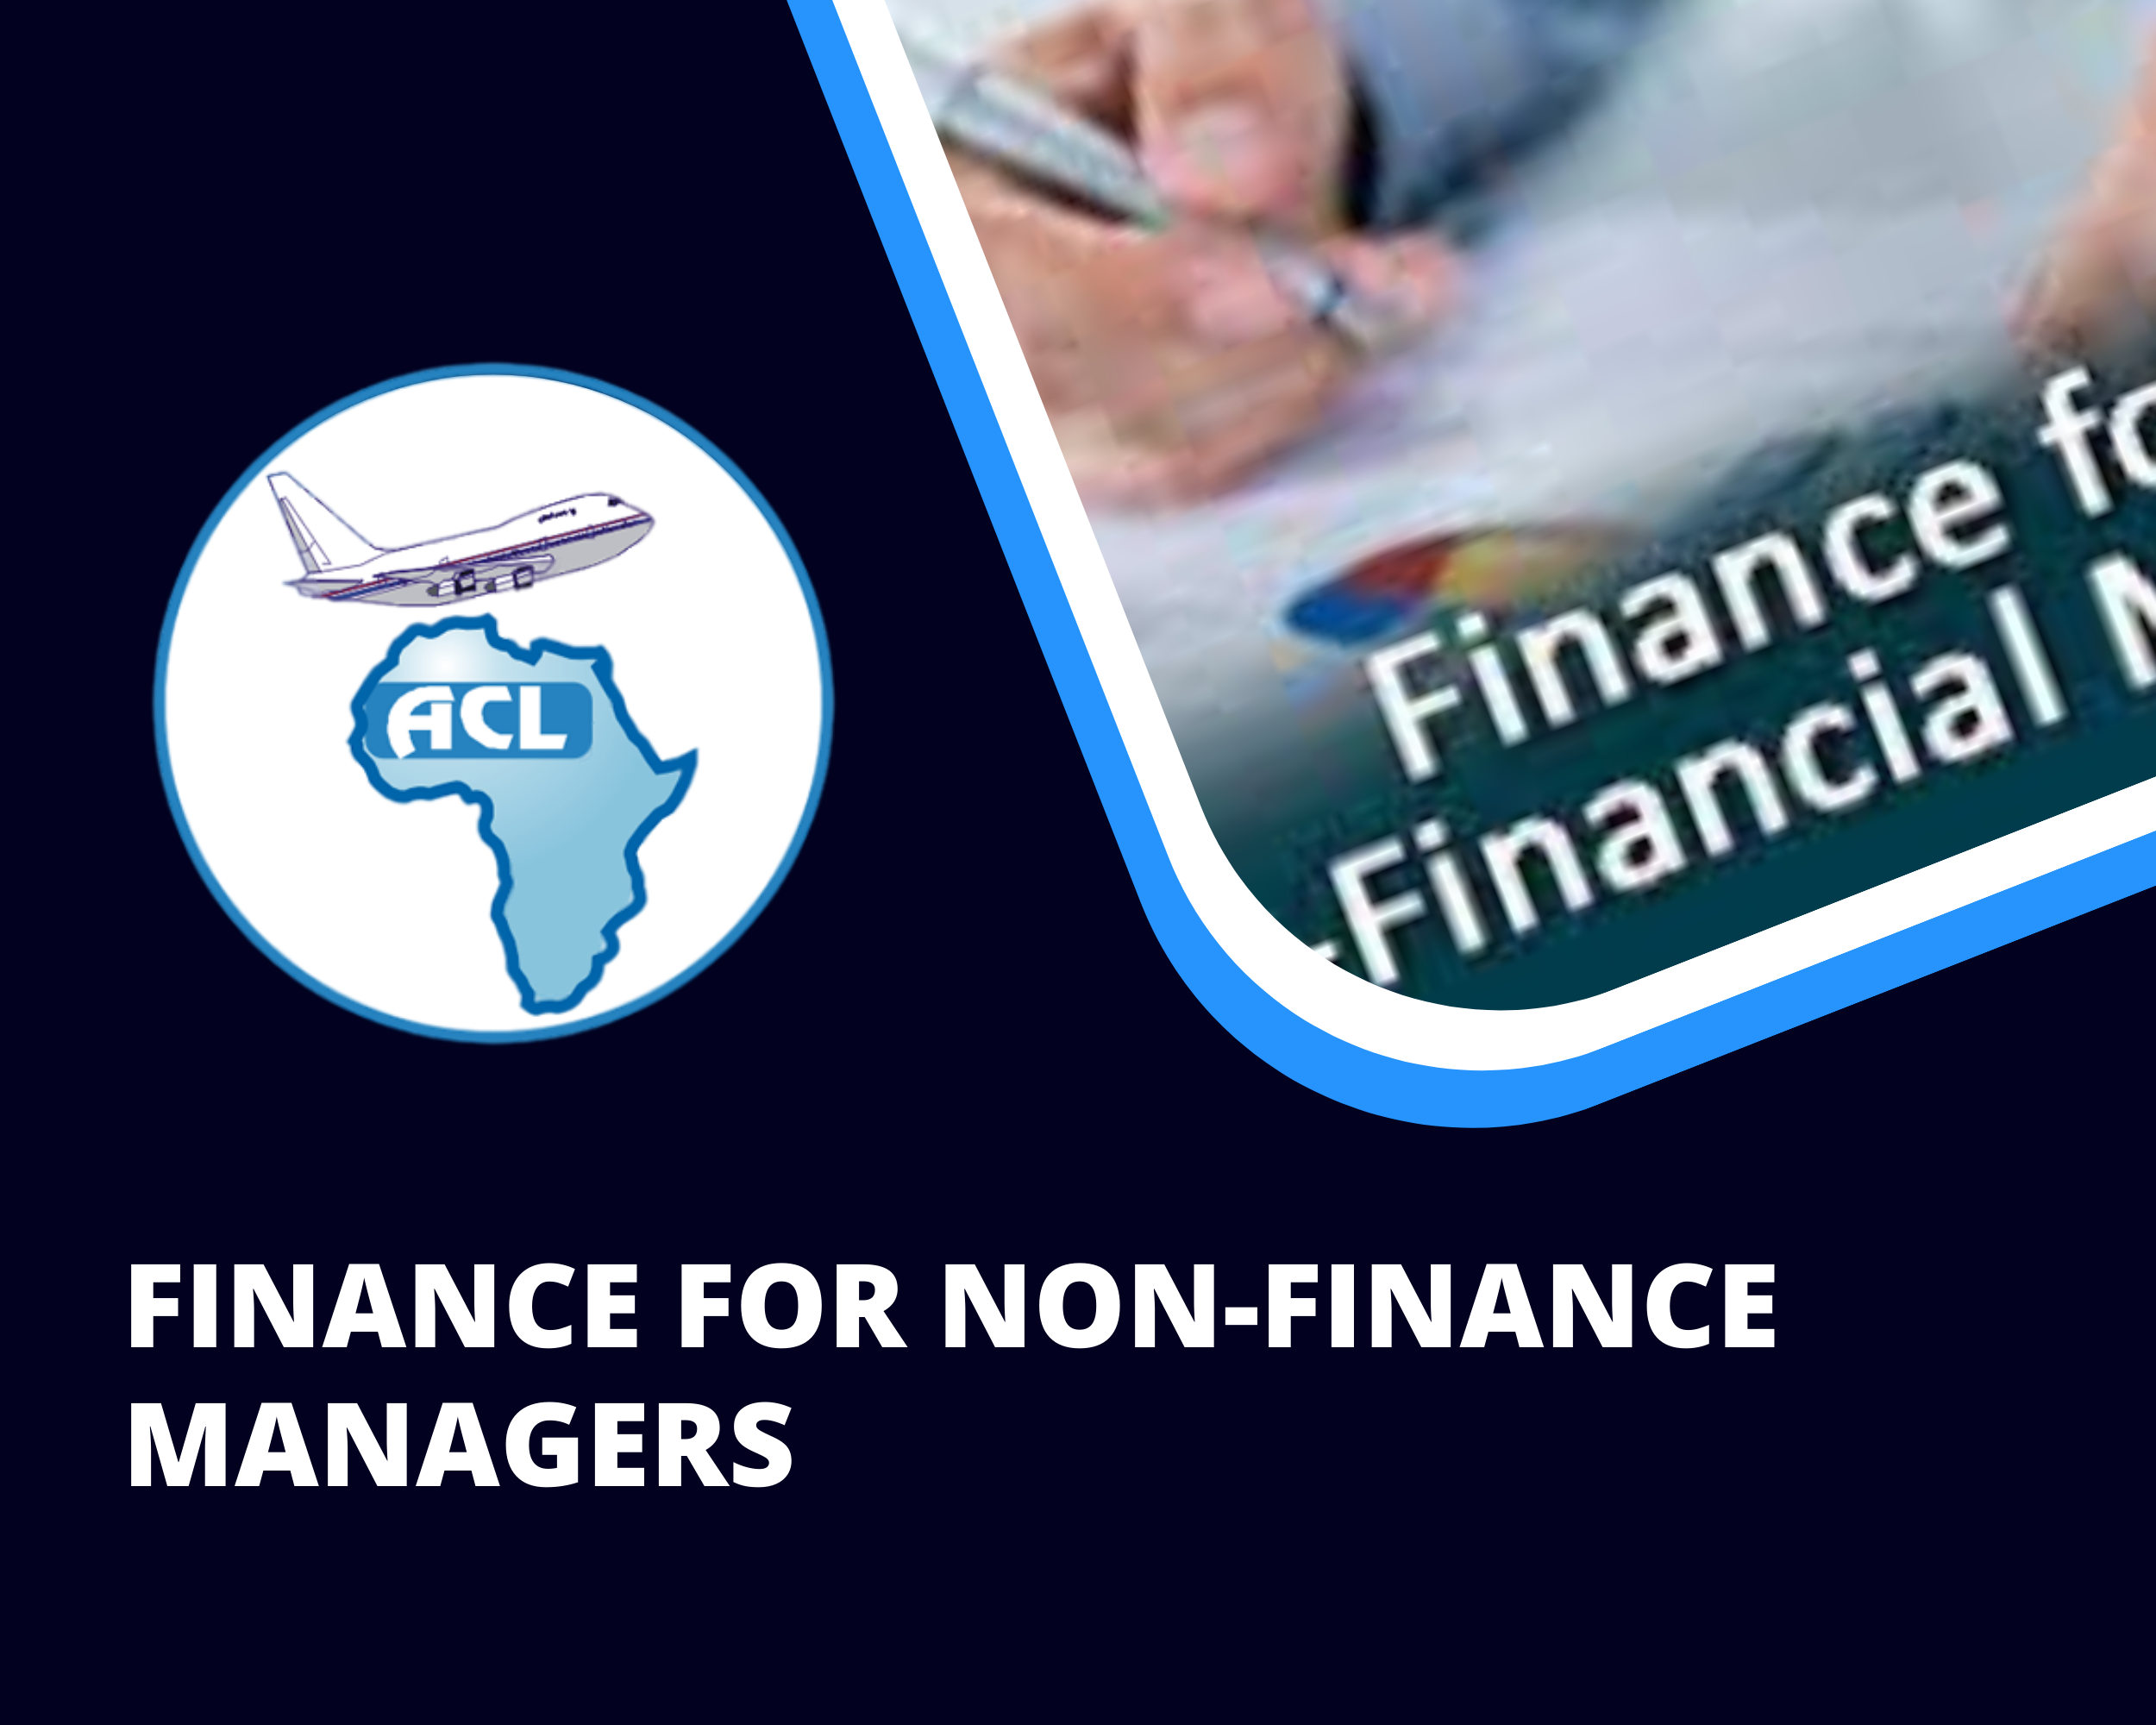 FINANCE FOR NON-FINANCE MANAGERS